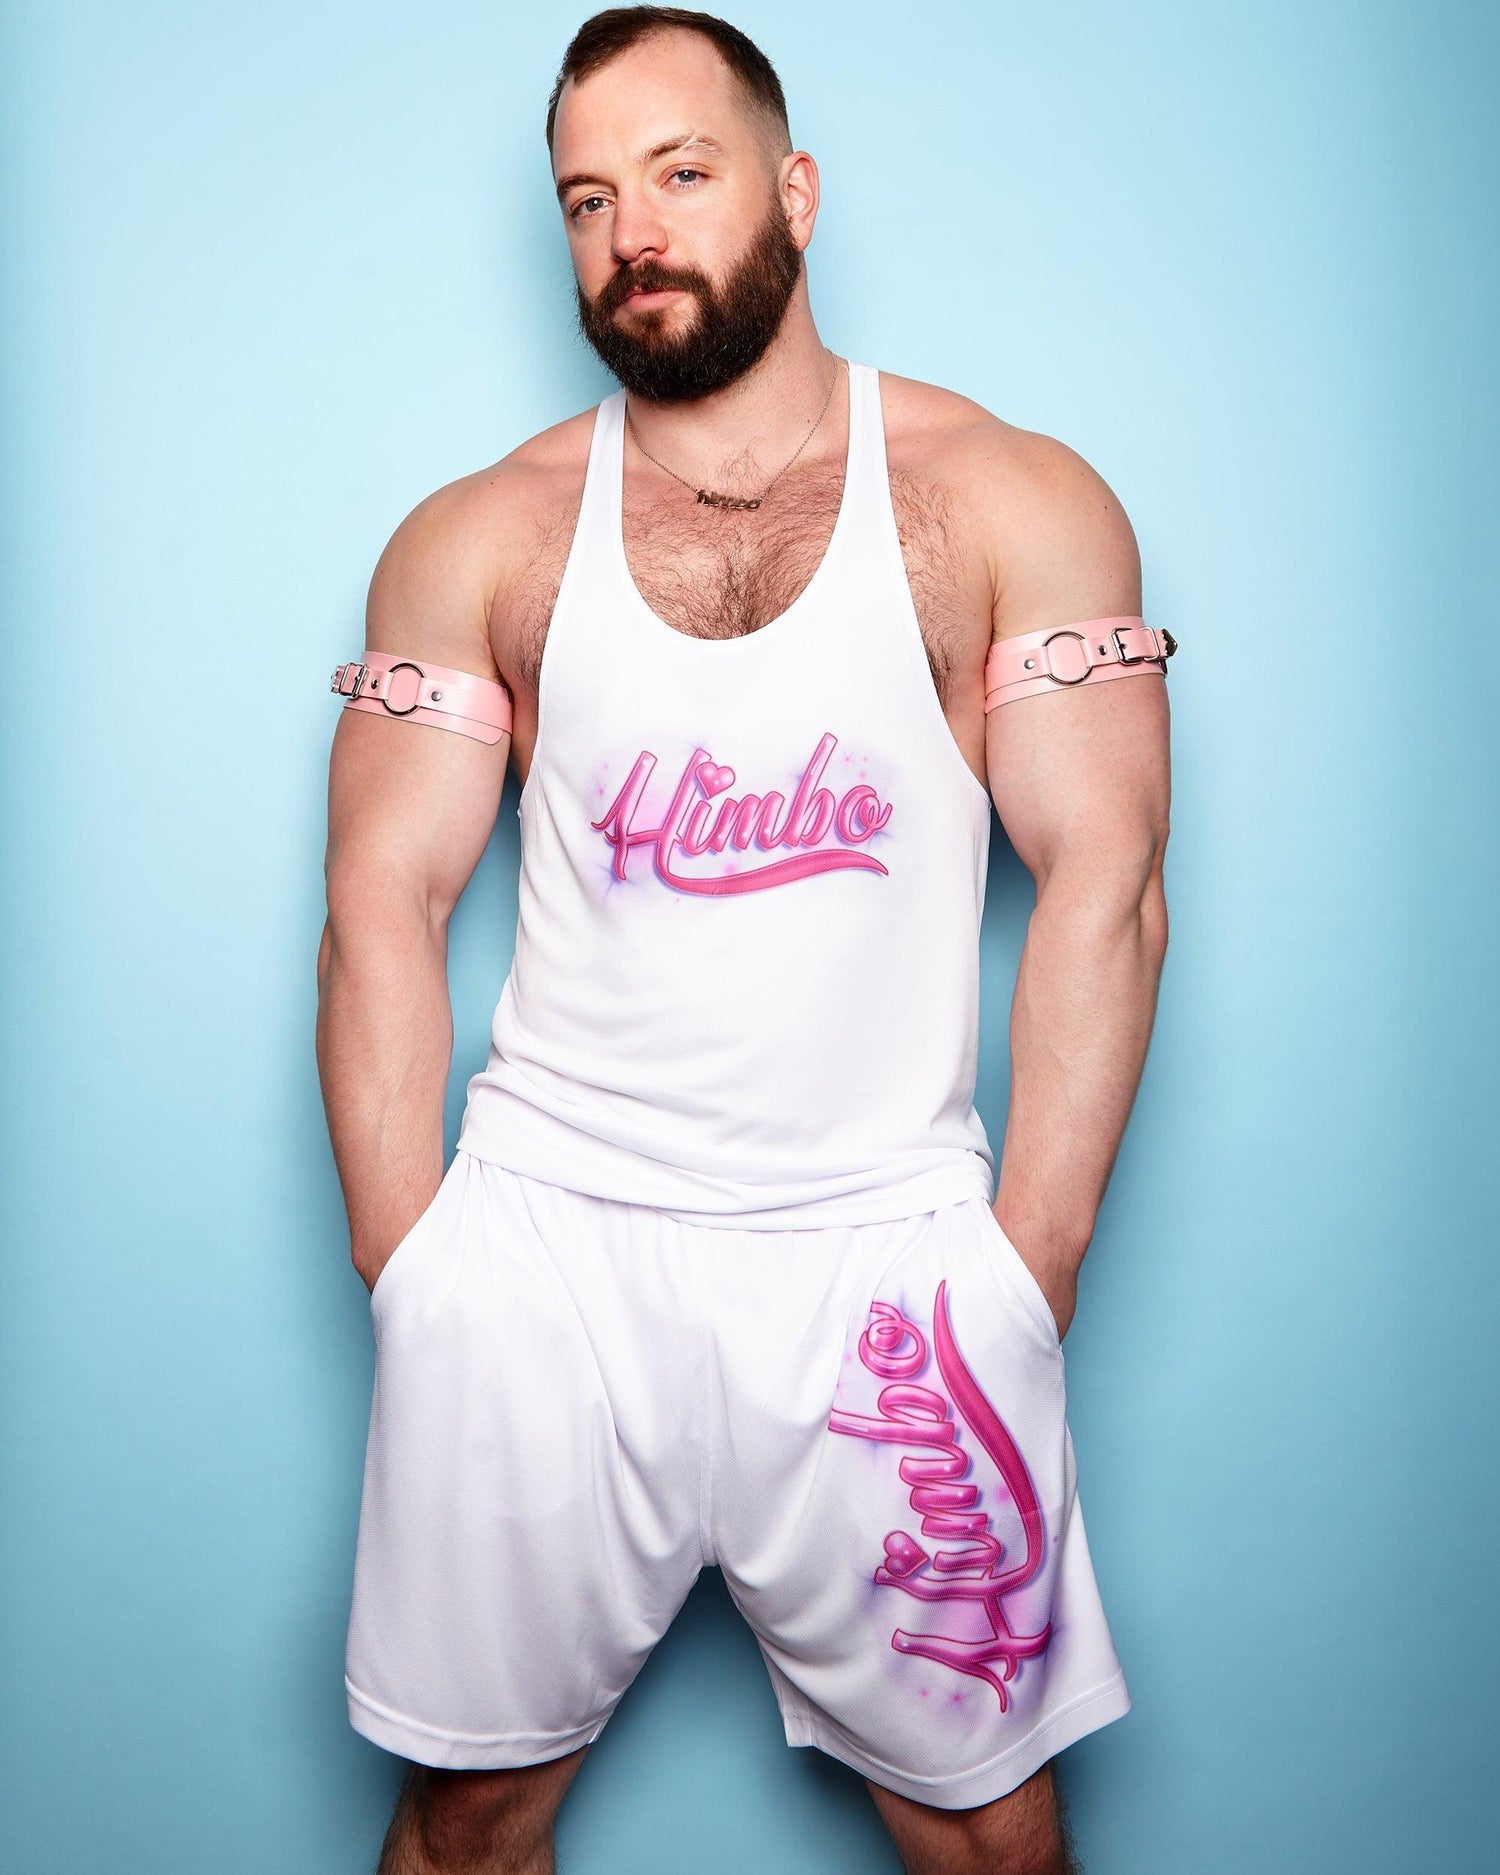 Double Pack - spray paint himbo - tank and basket ball shorts - Full outfit. - HOMOLONDON